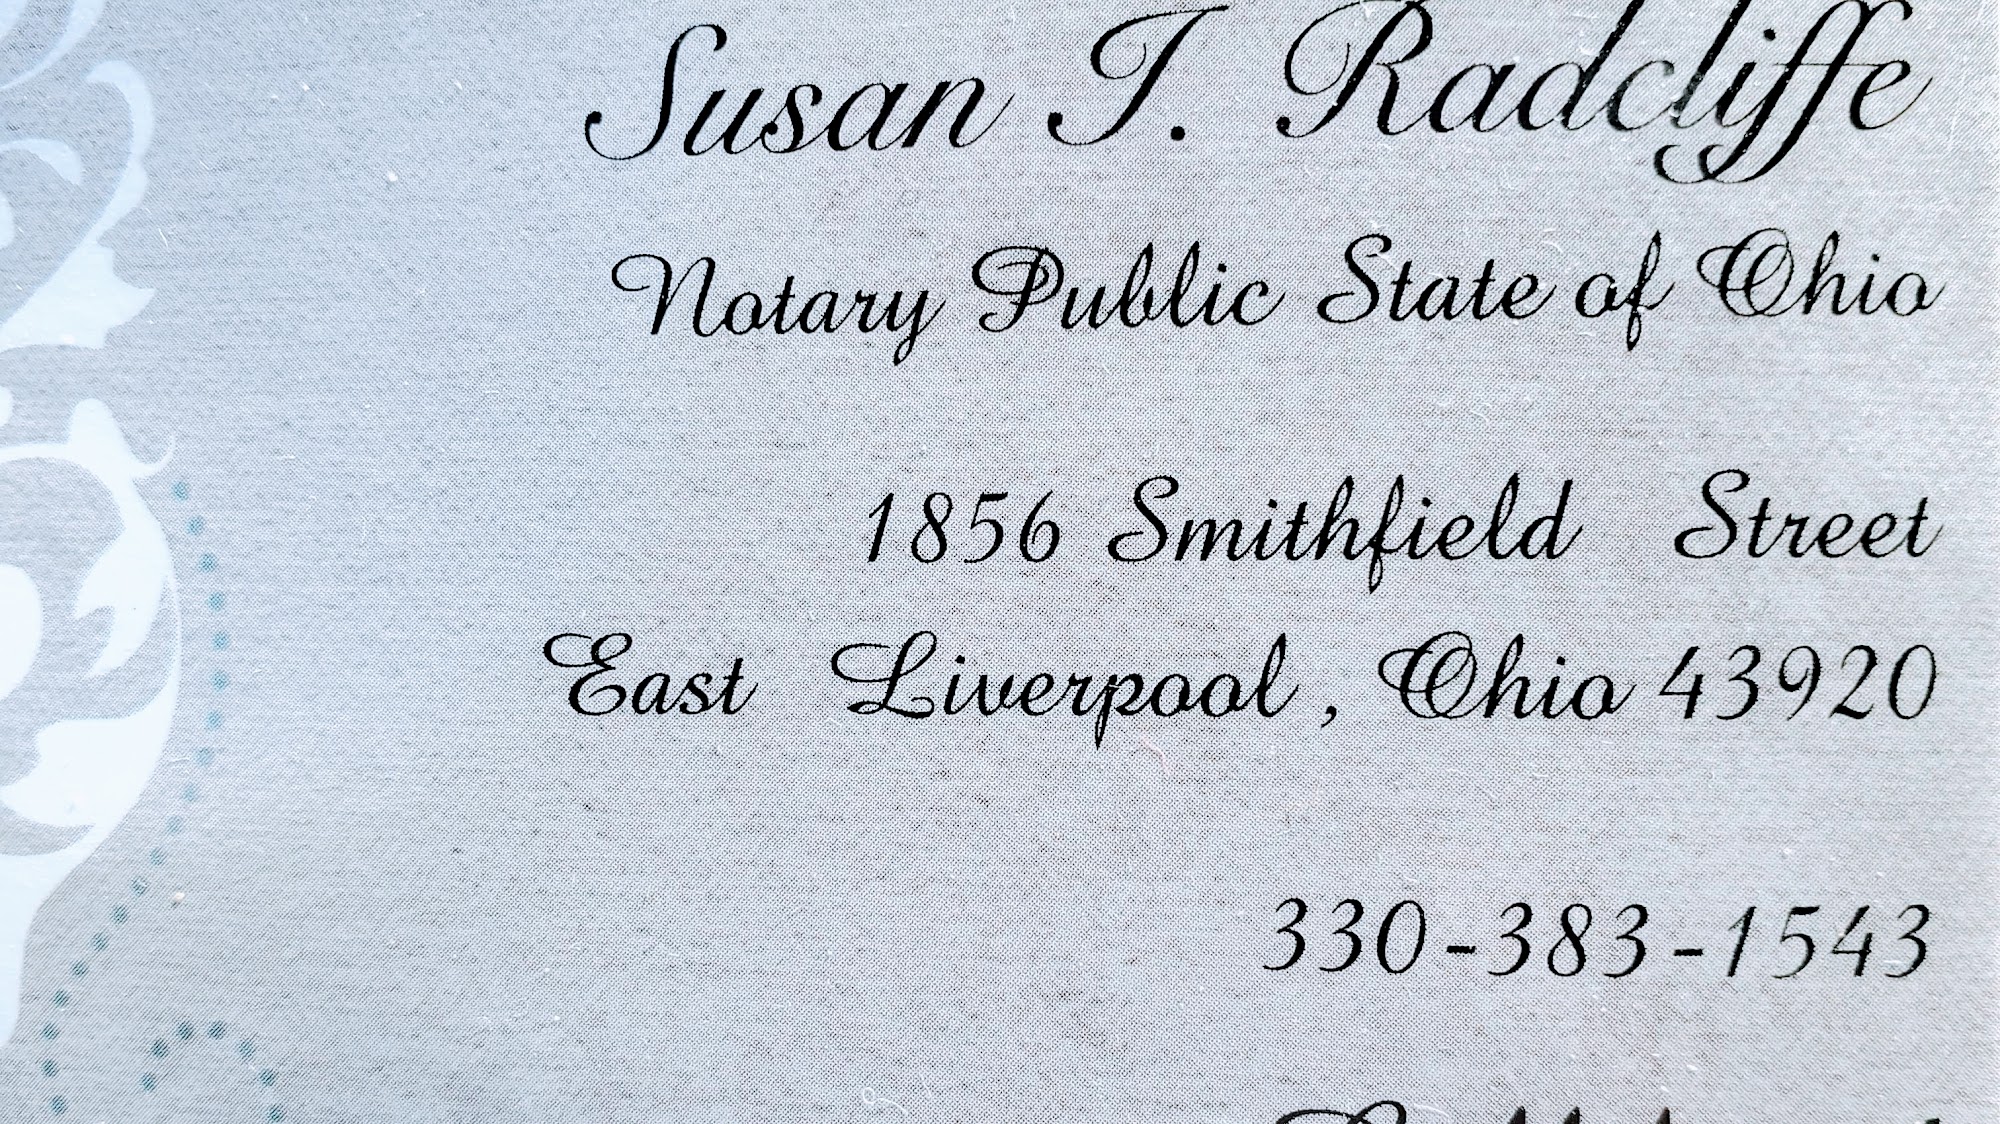 Radcliffe Notary Service 1856 Smithfield St, East Liverpool Ohio 43920